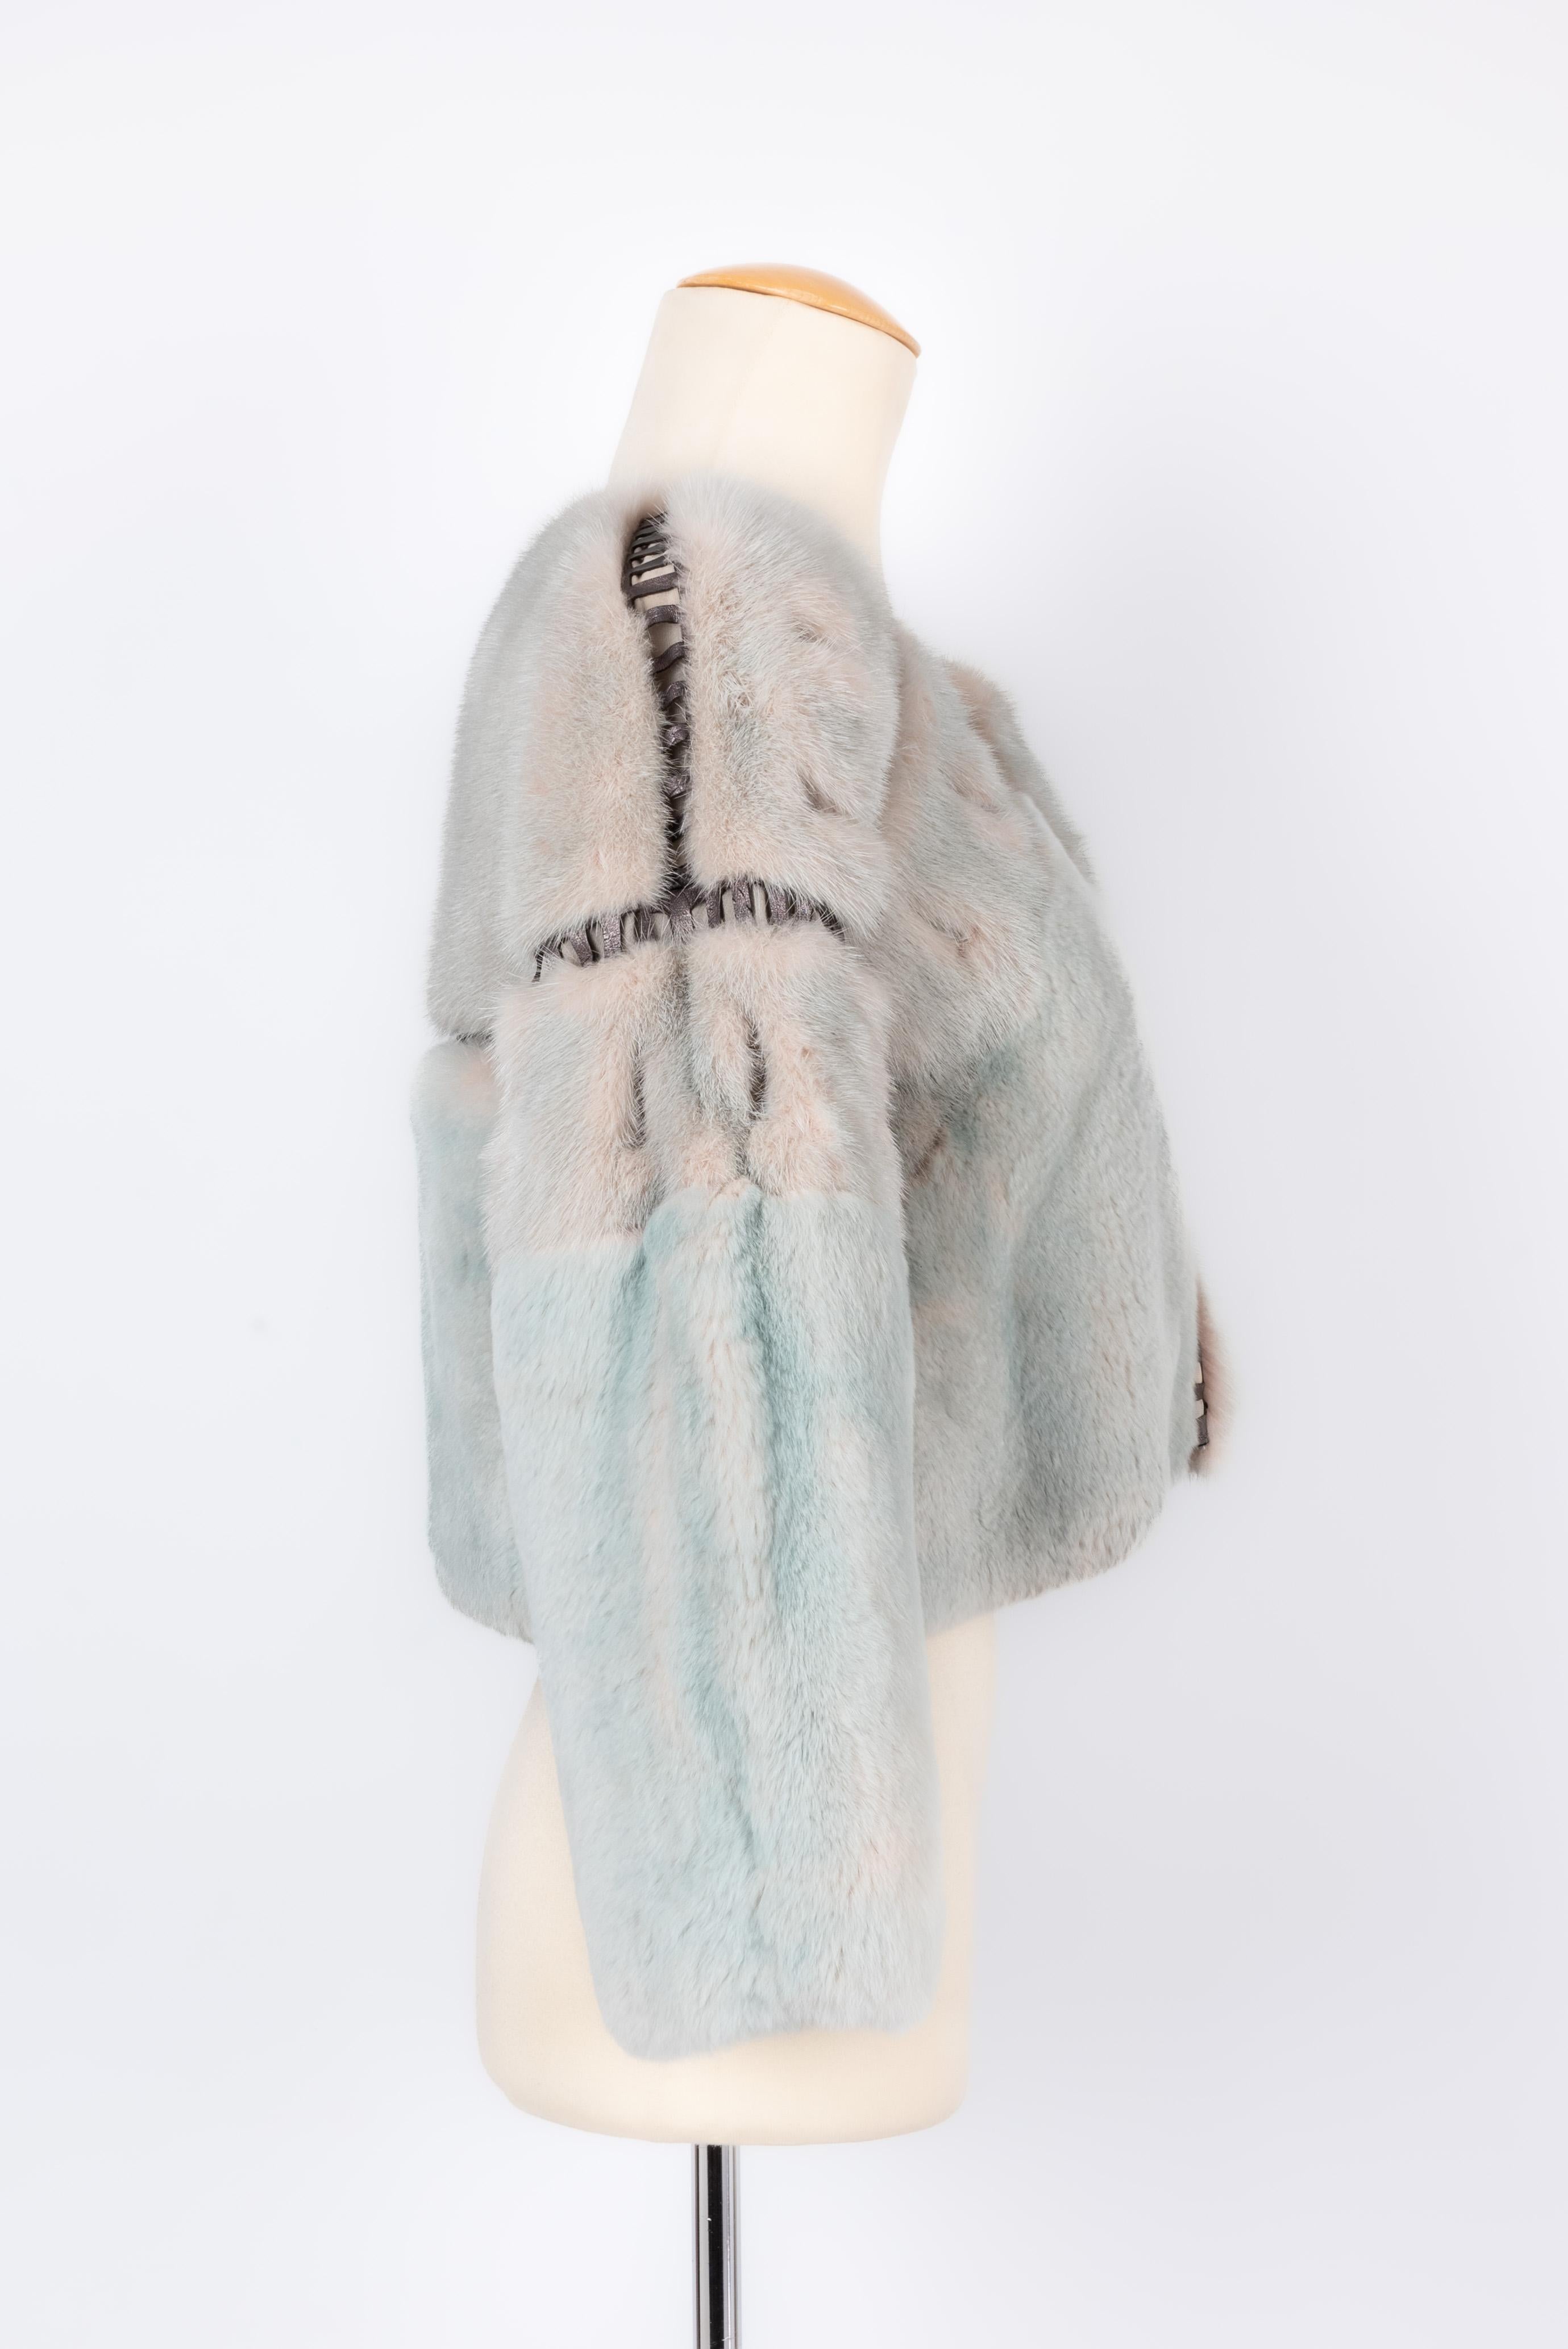 ROBERTO CAVALLI - (Made in Italy) Short jacket in shiny sky-blue mink and chinchilla interlaced with brown crocodile-style leather. No size indicated, it fits a 38FR.

Condition:
Very good condition

Dimensions:
Shoulder width: 43 cm - Sleeve